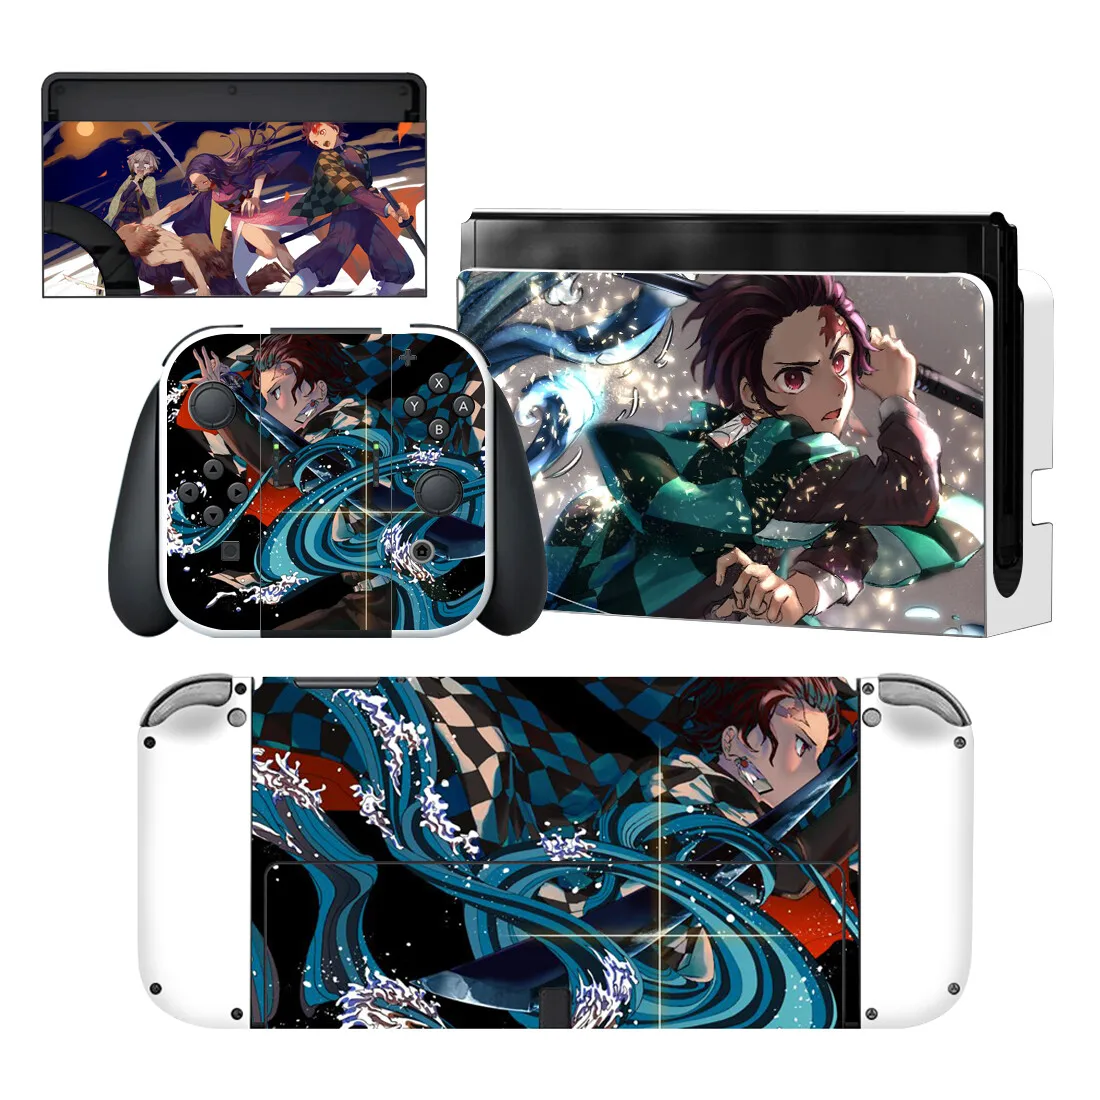 Demon Slayer Nintendoswitch Skin Cover Sticker Decal for Nintendo Switch OLED Console Joy-con Controller Dock Skin Vinyl